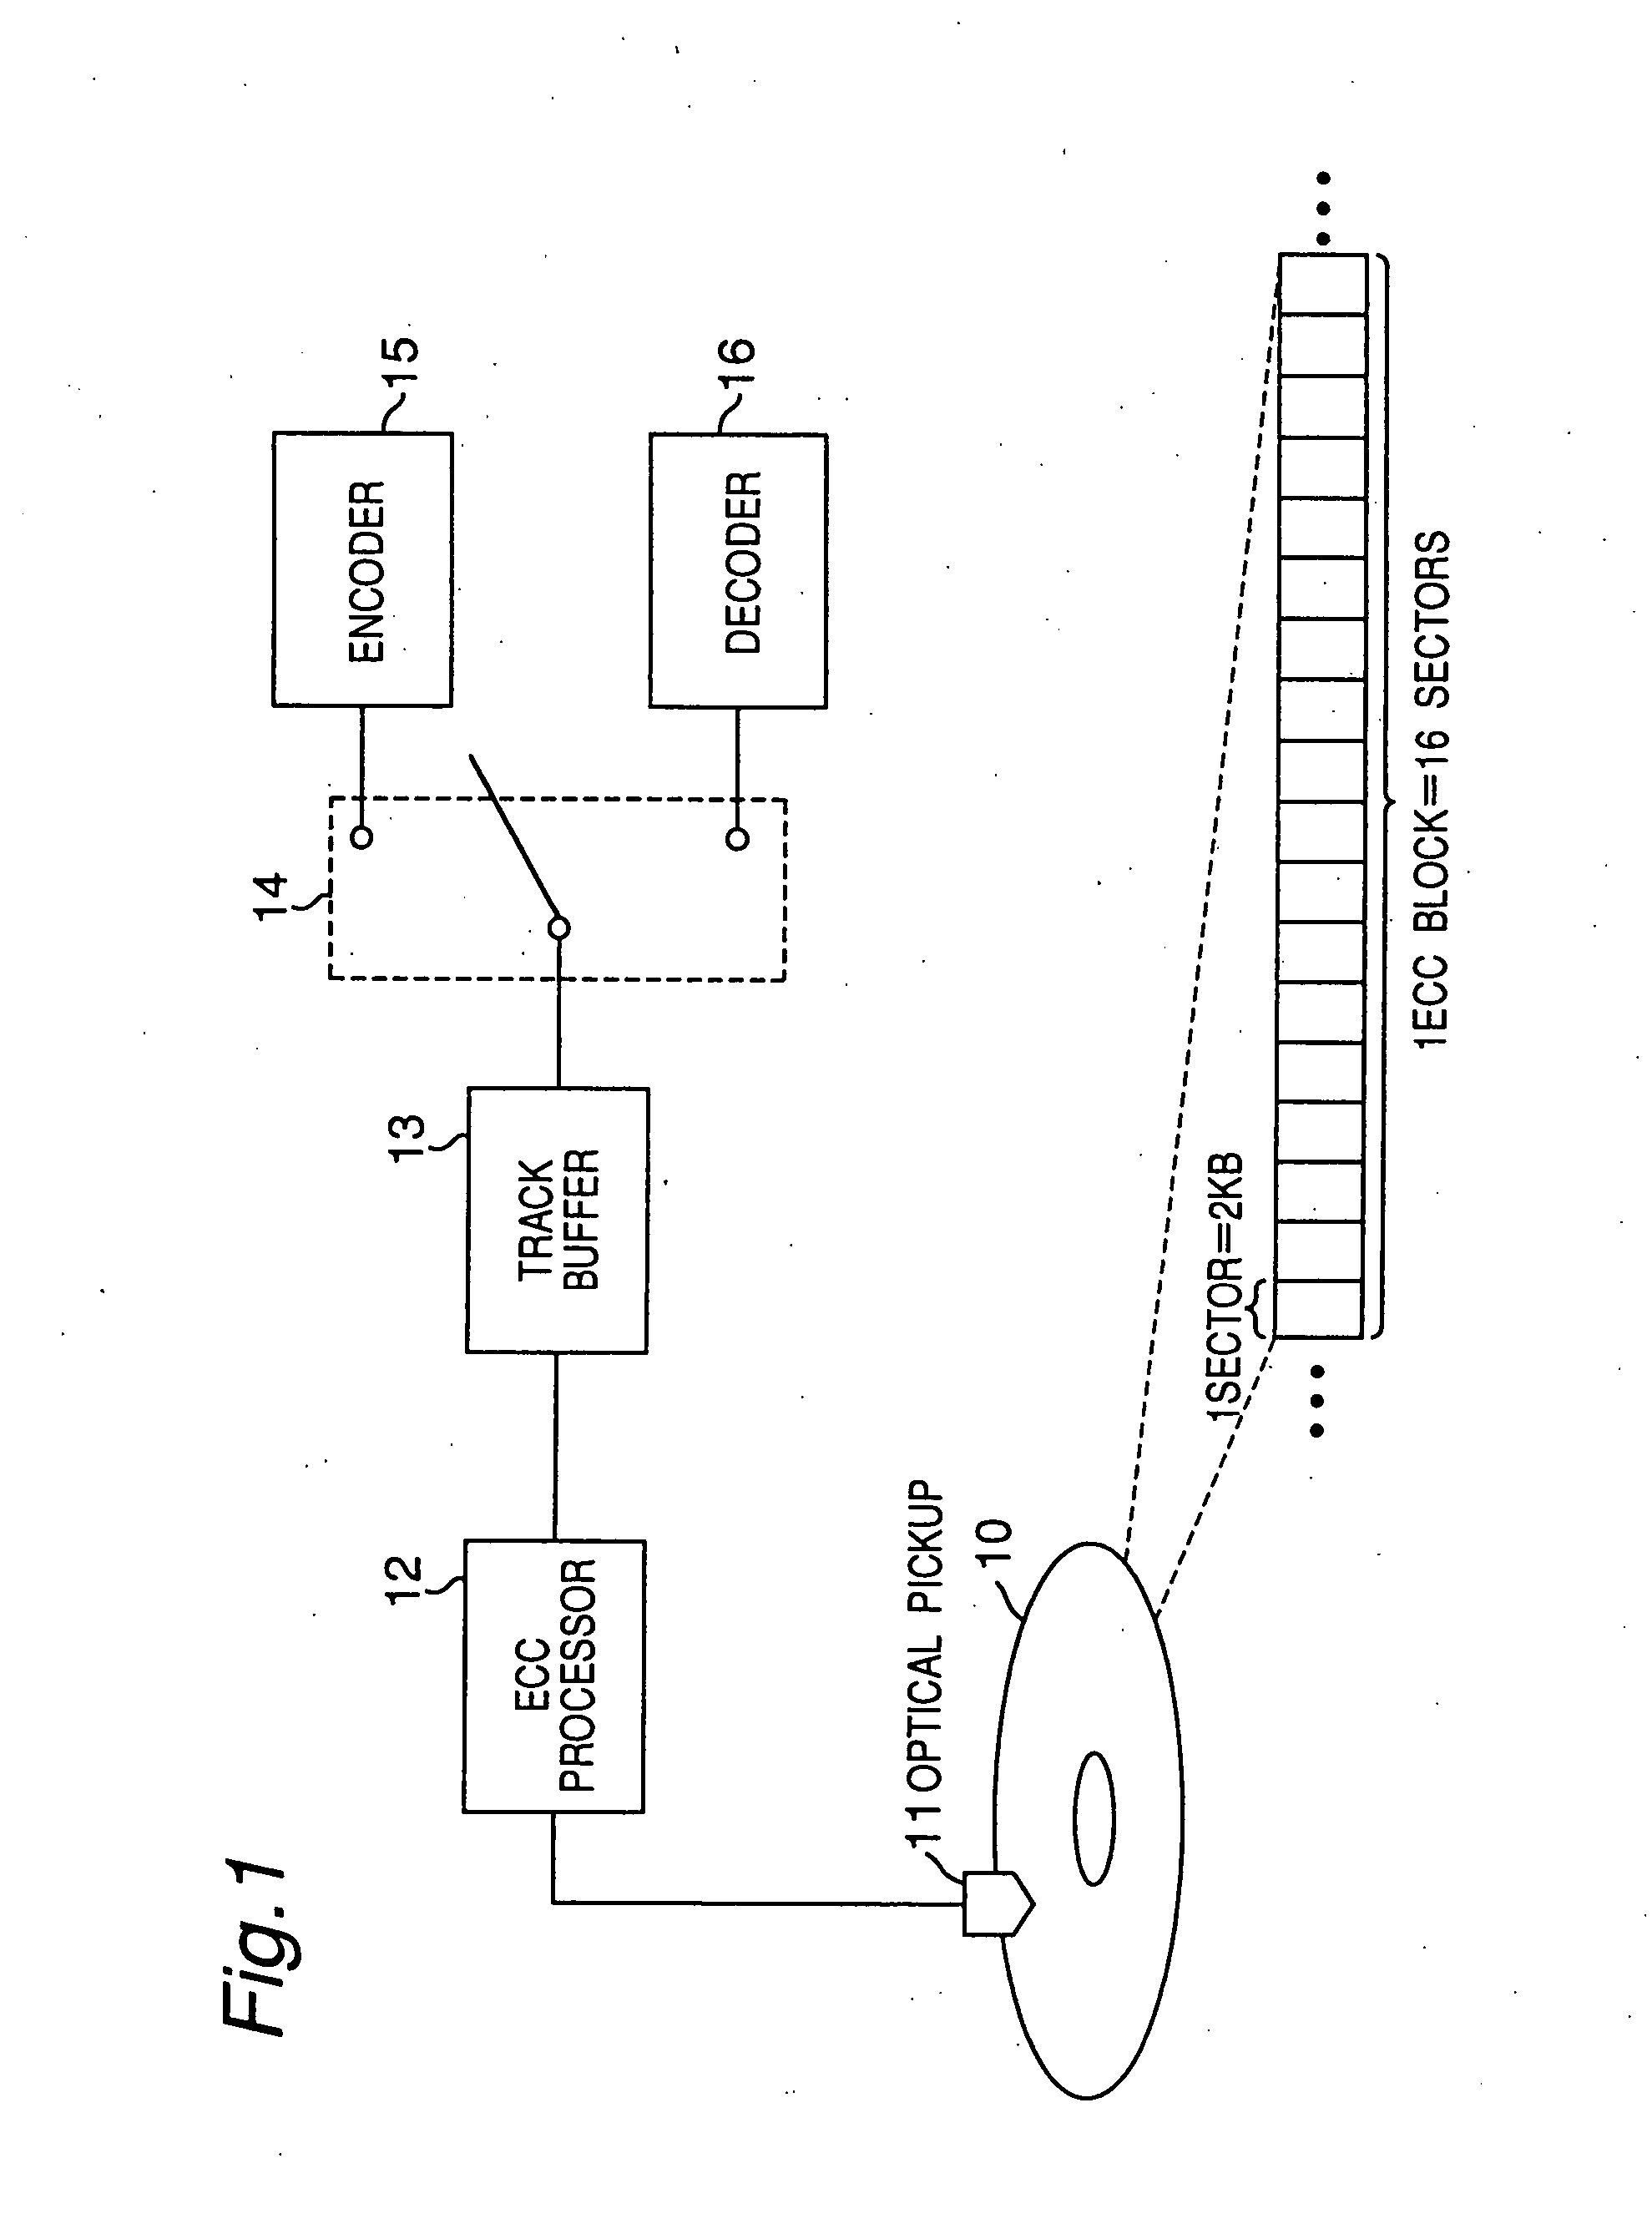 Information recording apparatus and method for the same